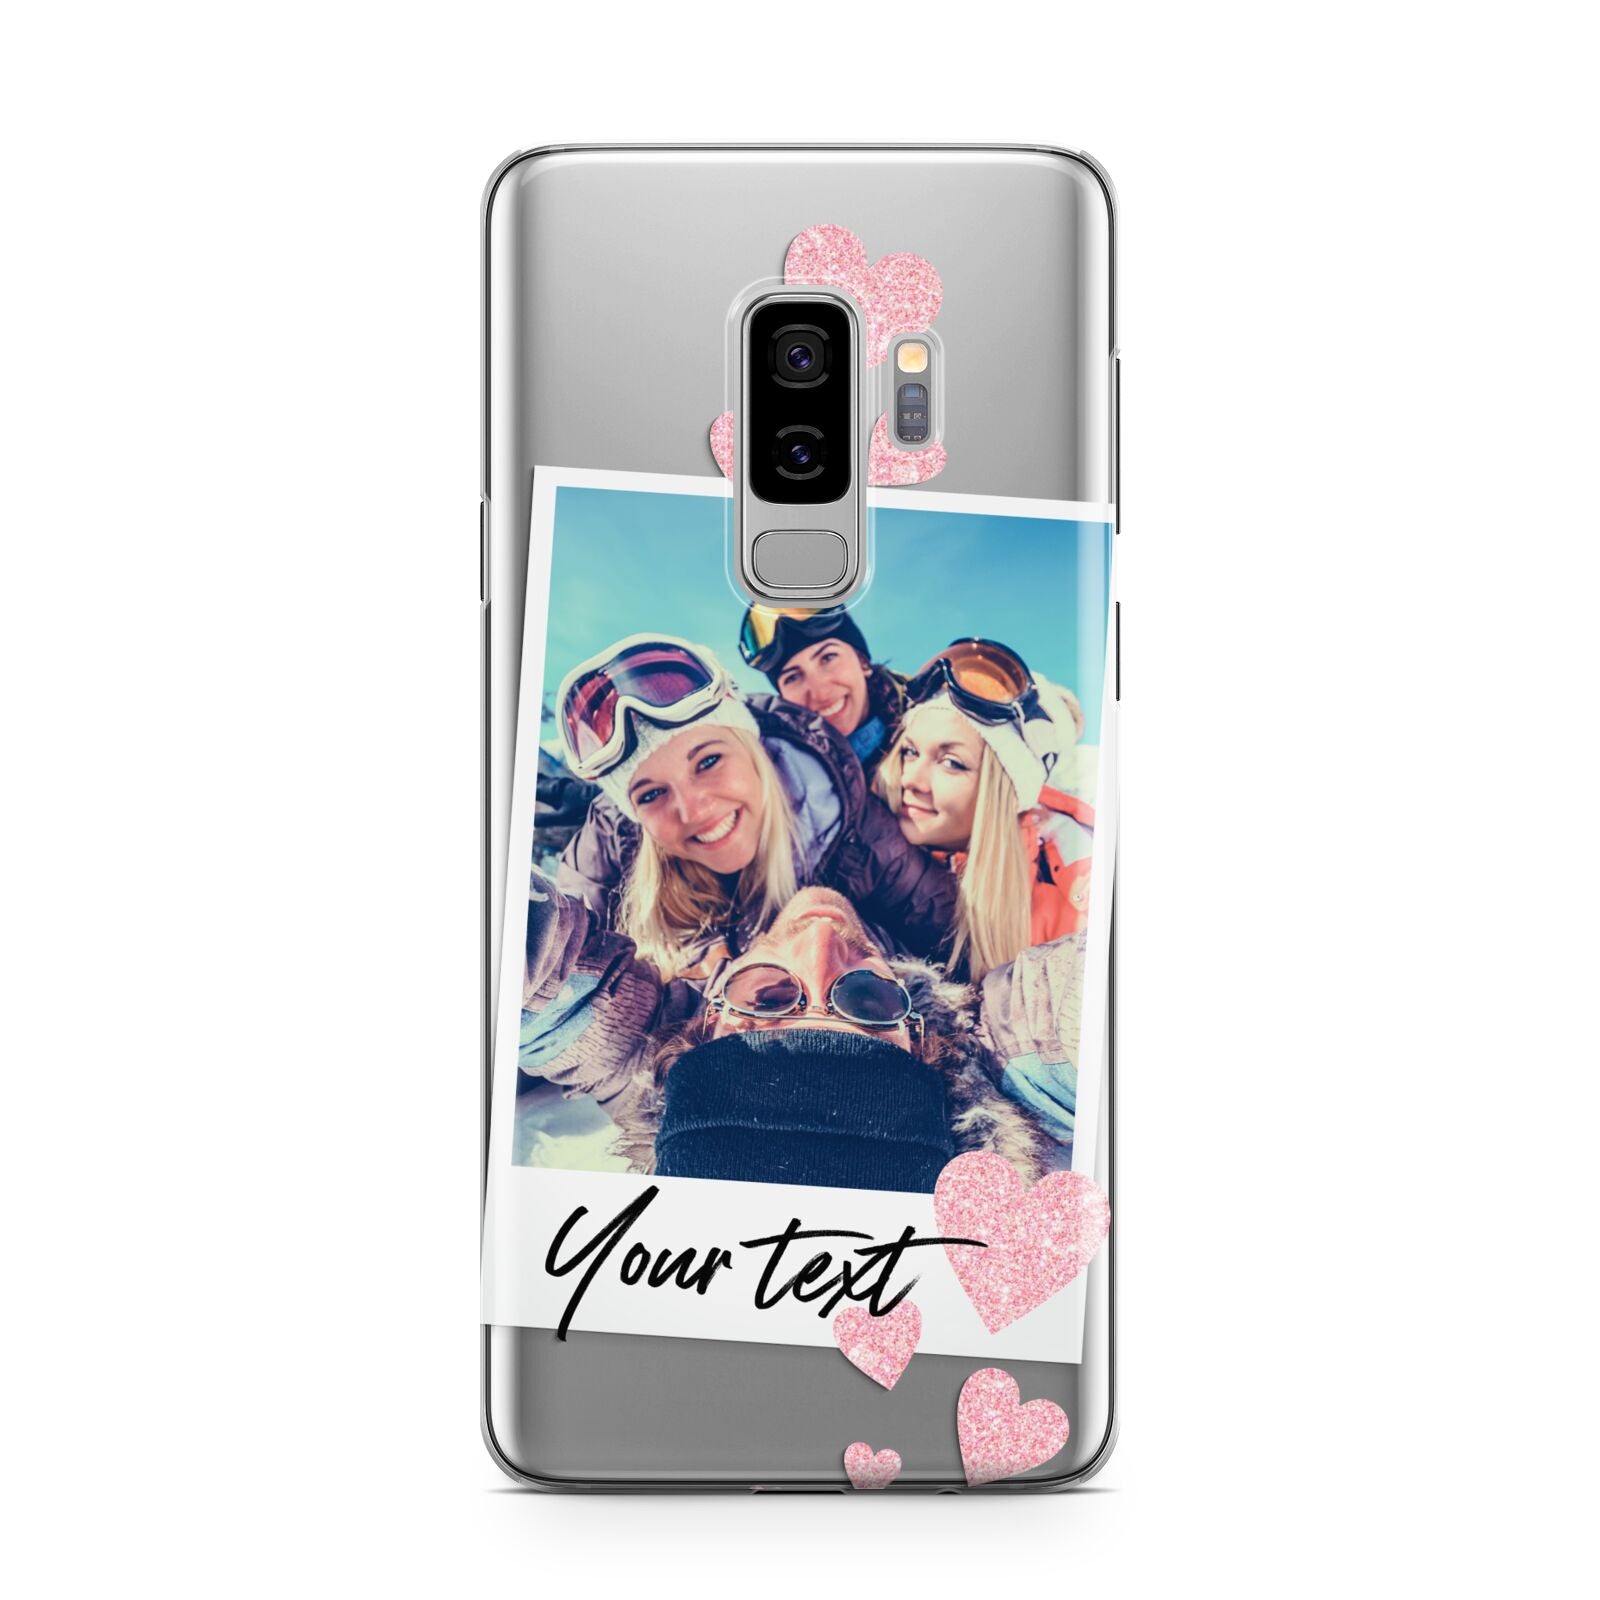 Photo with Text Samsung Galaxy S9 Plus Case on Silver phone